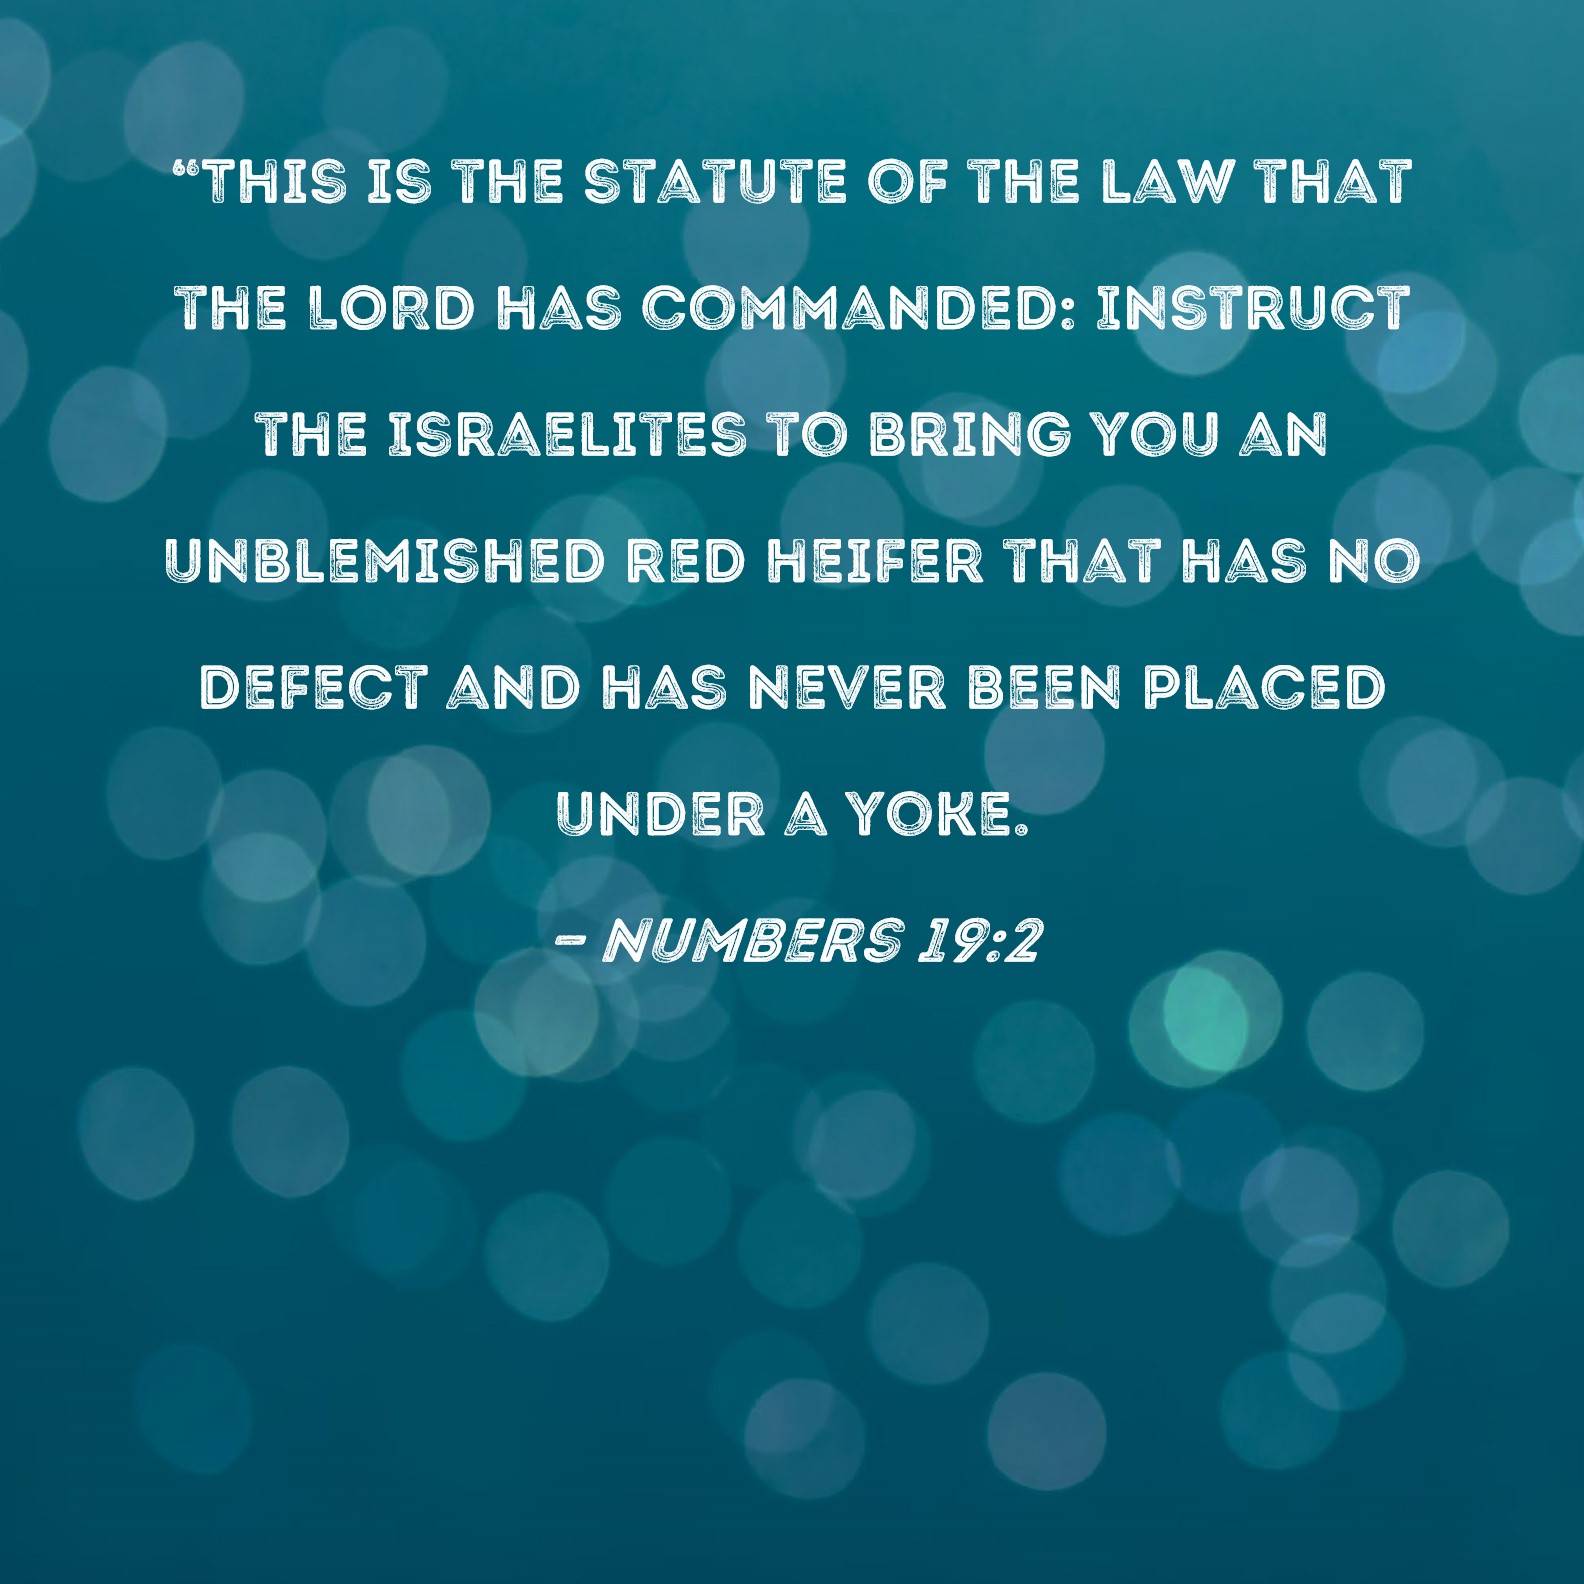 numbers-19-2-this-is-the-statute-of-the-law-that-the-lord-has-commanded-instruct-the